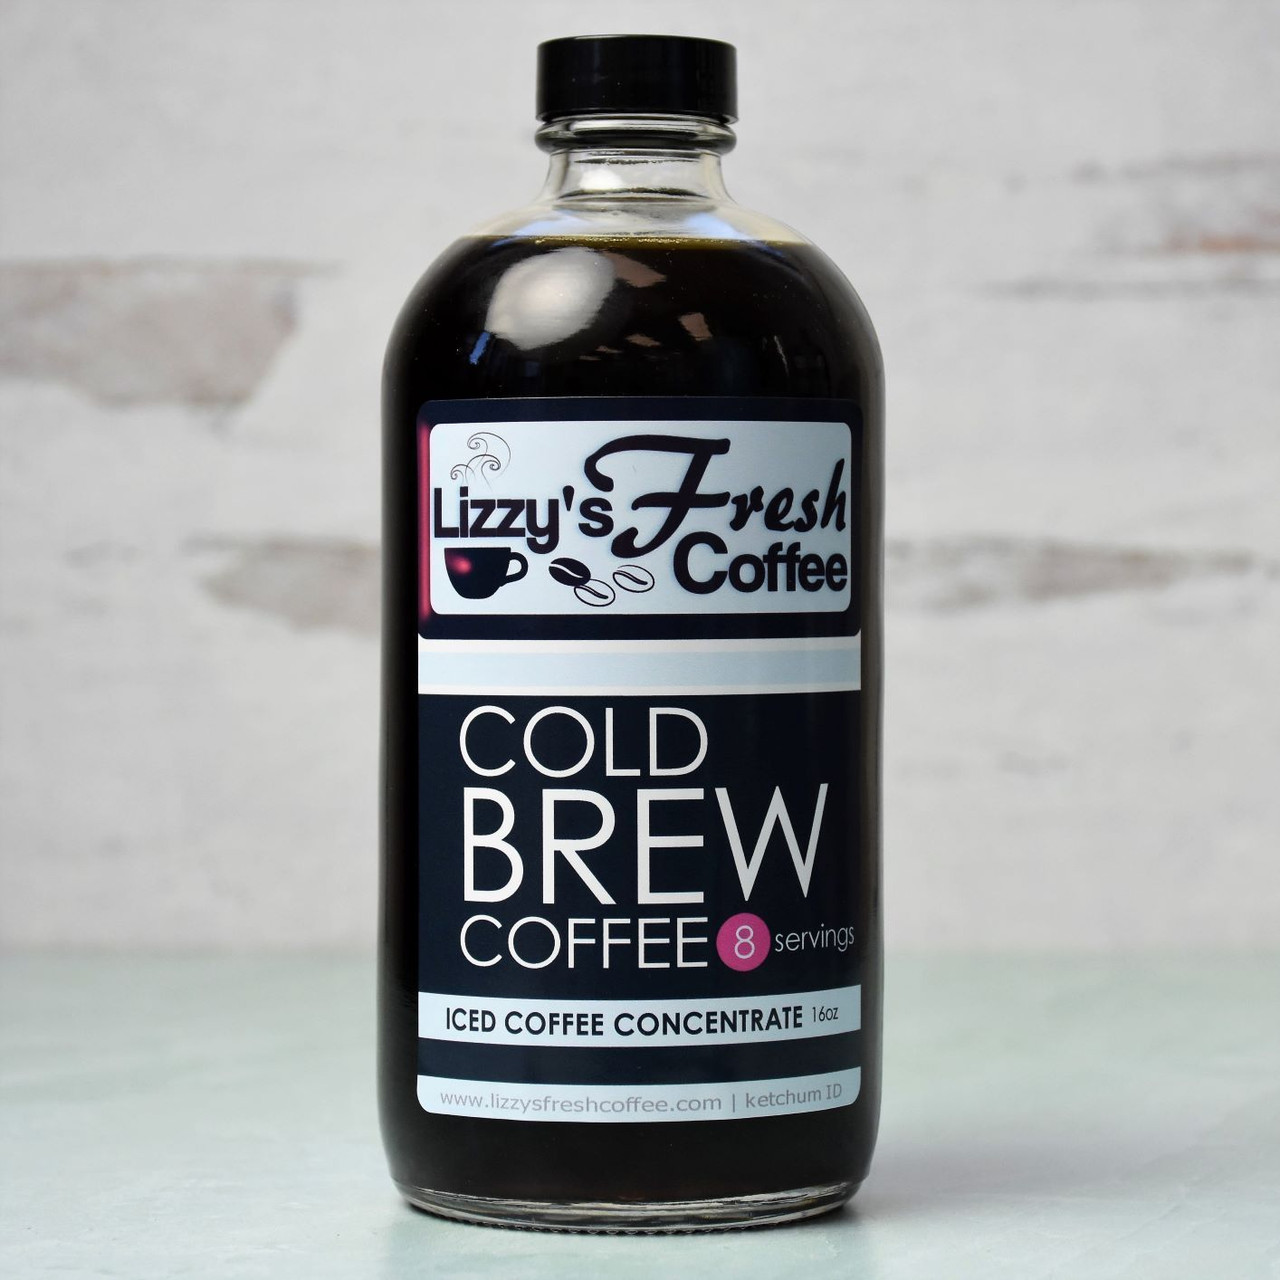 https://cdn11.bigcommerce.com/s-j7rwy2u58c/images/stencil/1280x1280/products/173/446/lizzy-s-cold-brew-coffee-concentrate-16-oz-76__76920.1651653350.jpg?c=1